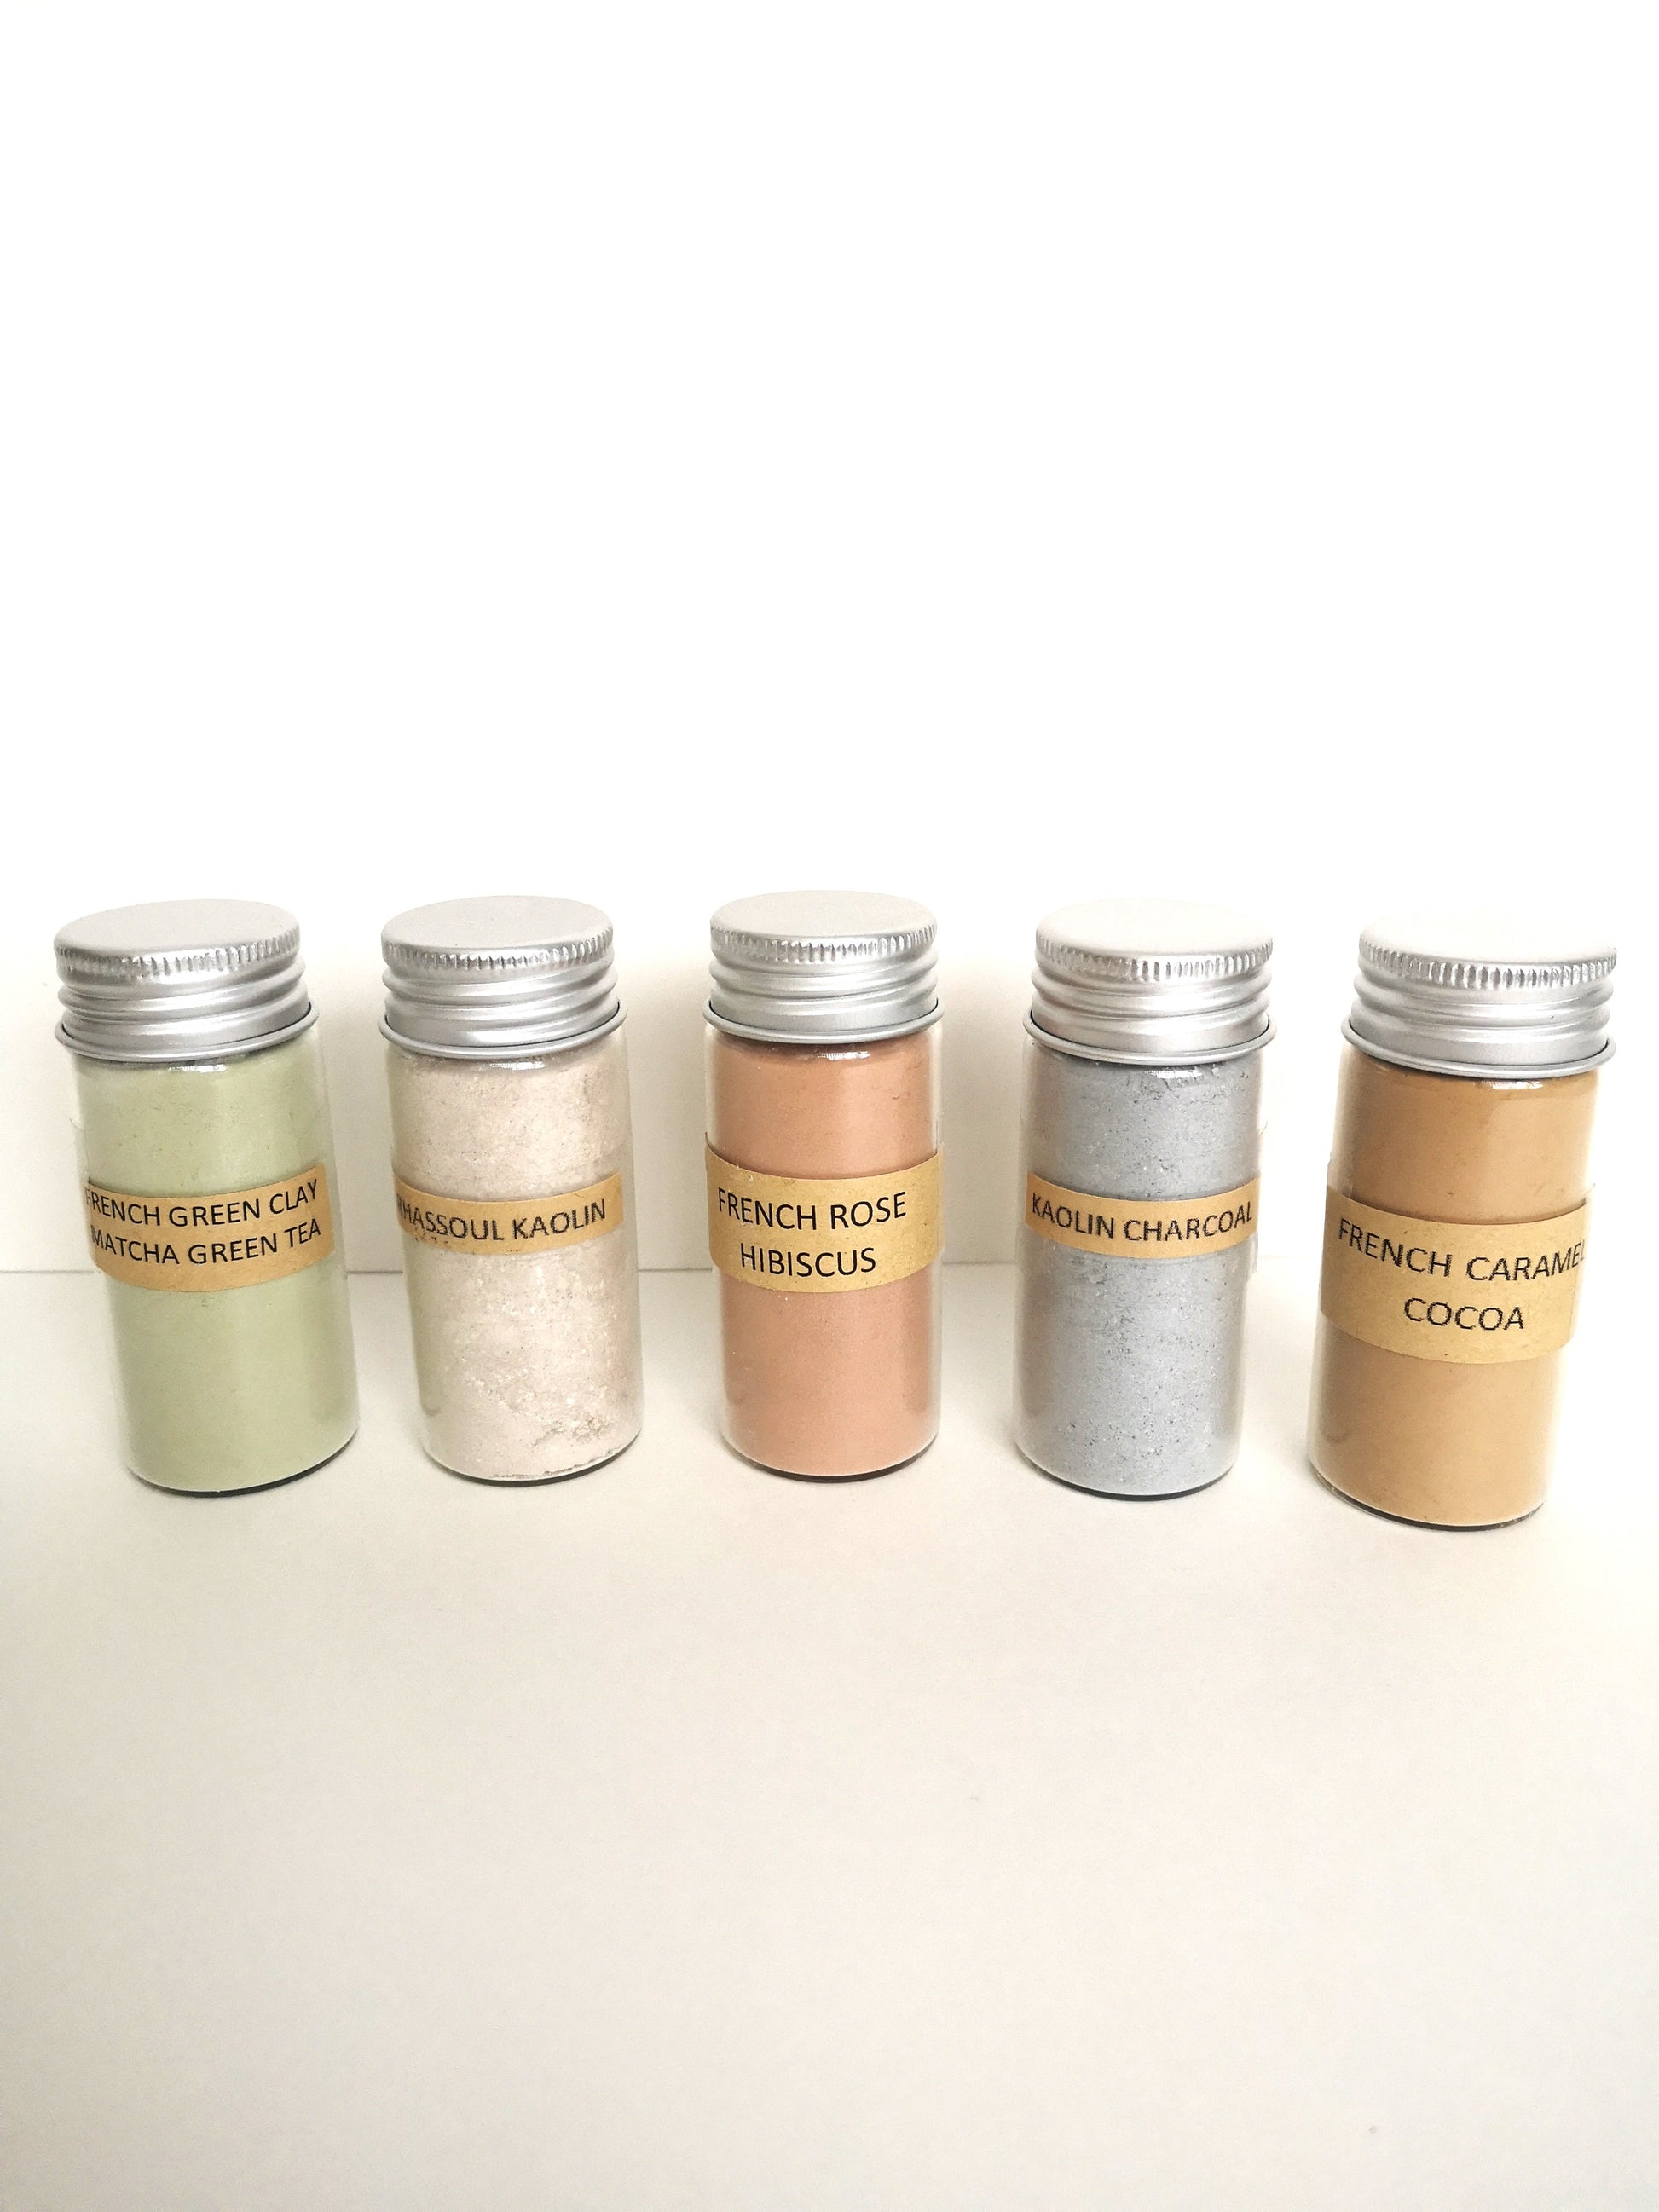 5 glass jars with silver lids containing clay masks: french green clay matcha green tea, rhassoul kaolin, french rose hibiscus, kaolin charcoal, french caramel cocoa